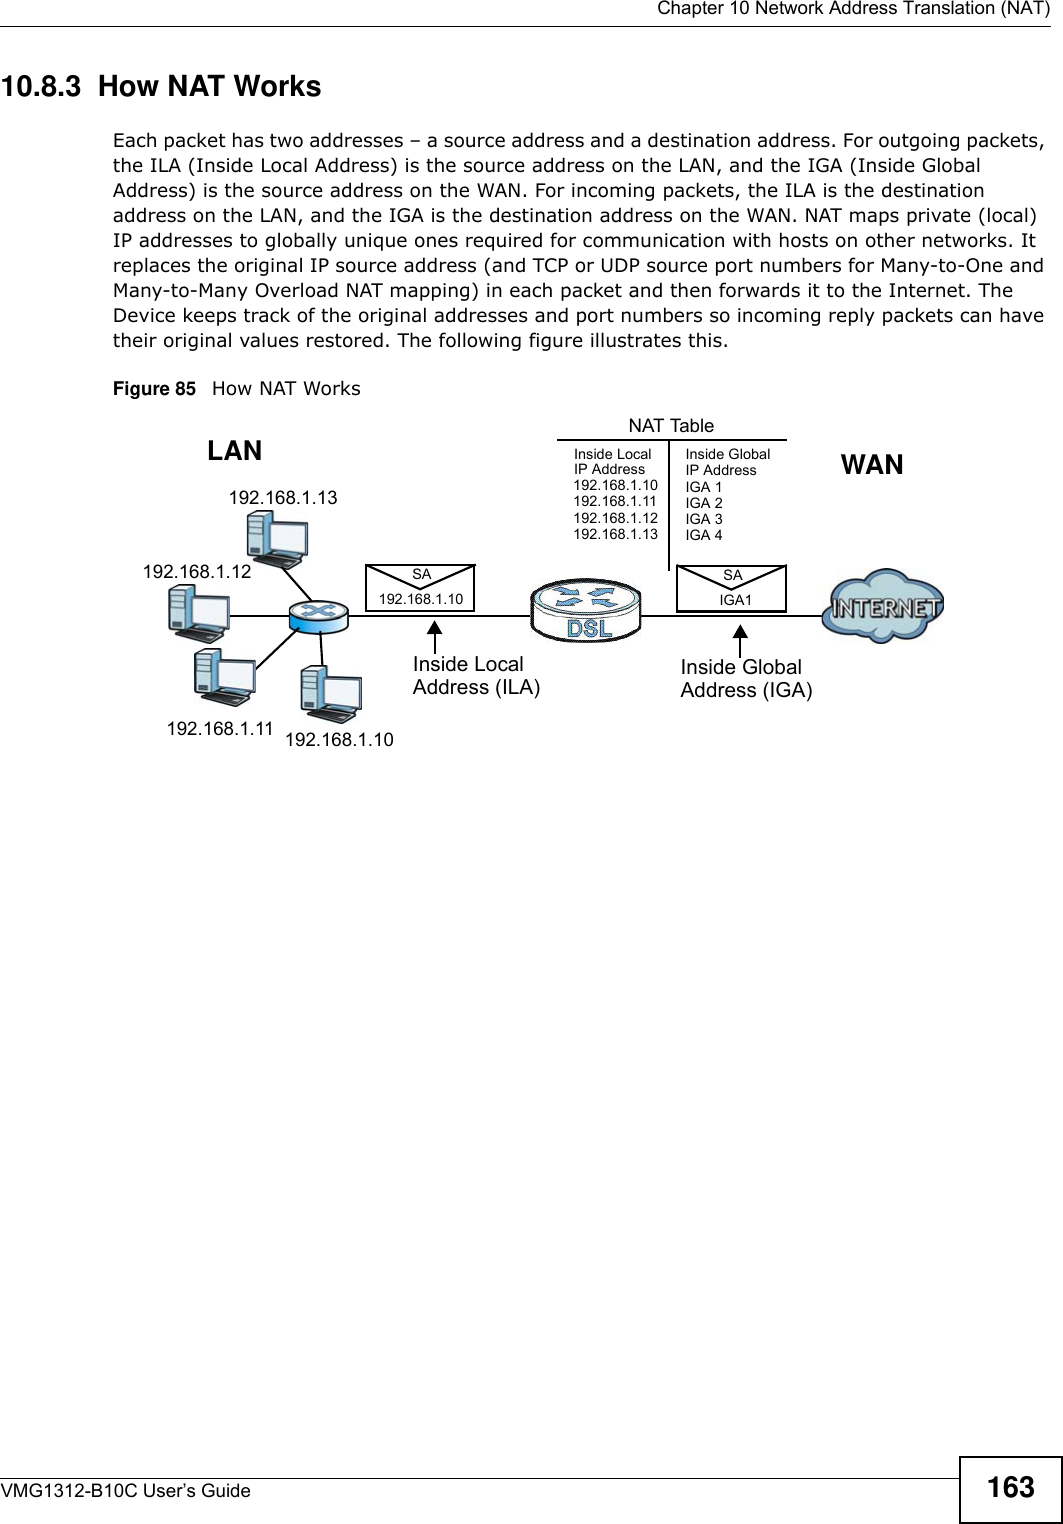  Chapter 10 Network Address Translation (NAT)VMG1312-B10C User’s Guide 16310.8.3  How NAT WorksEach packet has two addresses – a source address and a destination address. For outgoing packets, the ILA (Inside Local Address) is the source address on the LAN, and the IGA (Inside Global Address) is the source address on the WAN. For incoming packets, the ILA is the destination address on the LAN, and the IGA is the destination address on the WAN. NAT maps private (local) IP addresses to globally unique ones required for communication with hosts on other networks. It replaces the original IP source address (and TCP or UDP source port numbers for Many-to-One and Many-to-Many Overload NAT mapping) in each packet and then forwards it to the Internet. The Device keeps track of the original addresses and port numbers so incoming reply packets can have their original values restored. The following figure illustrates this.Figure 85   How NAT Works192.168.1.13192.168.1.10192.168.1.11192.168.1.12 SA192.168.1.10SAIGA1Inside LocalIP Address192.168.1.10192.168.1.11192.168.1.12192.168.1.13Inside Global IP AddressIGA 1IGA 2IGA 3IGA 4NAT TableWANLANInside LocalAddress (ILA)Inside GlobalAddress (IGA)